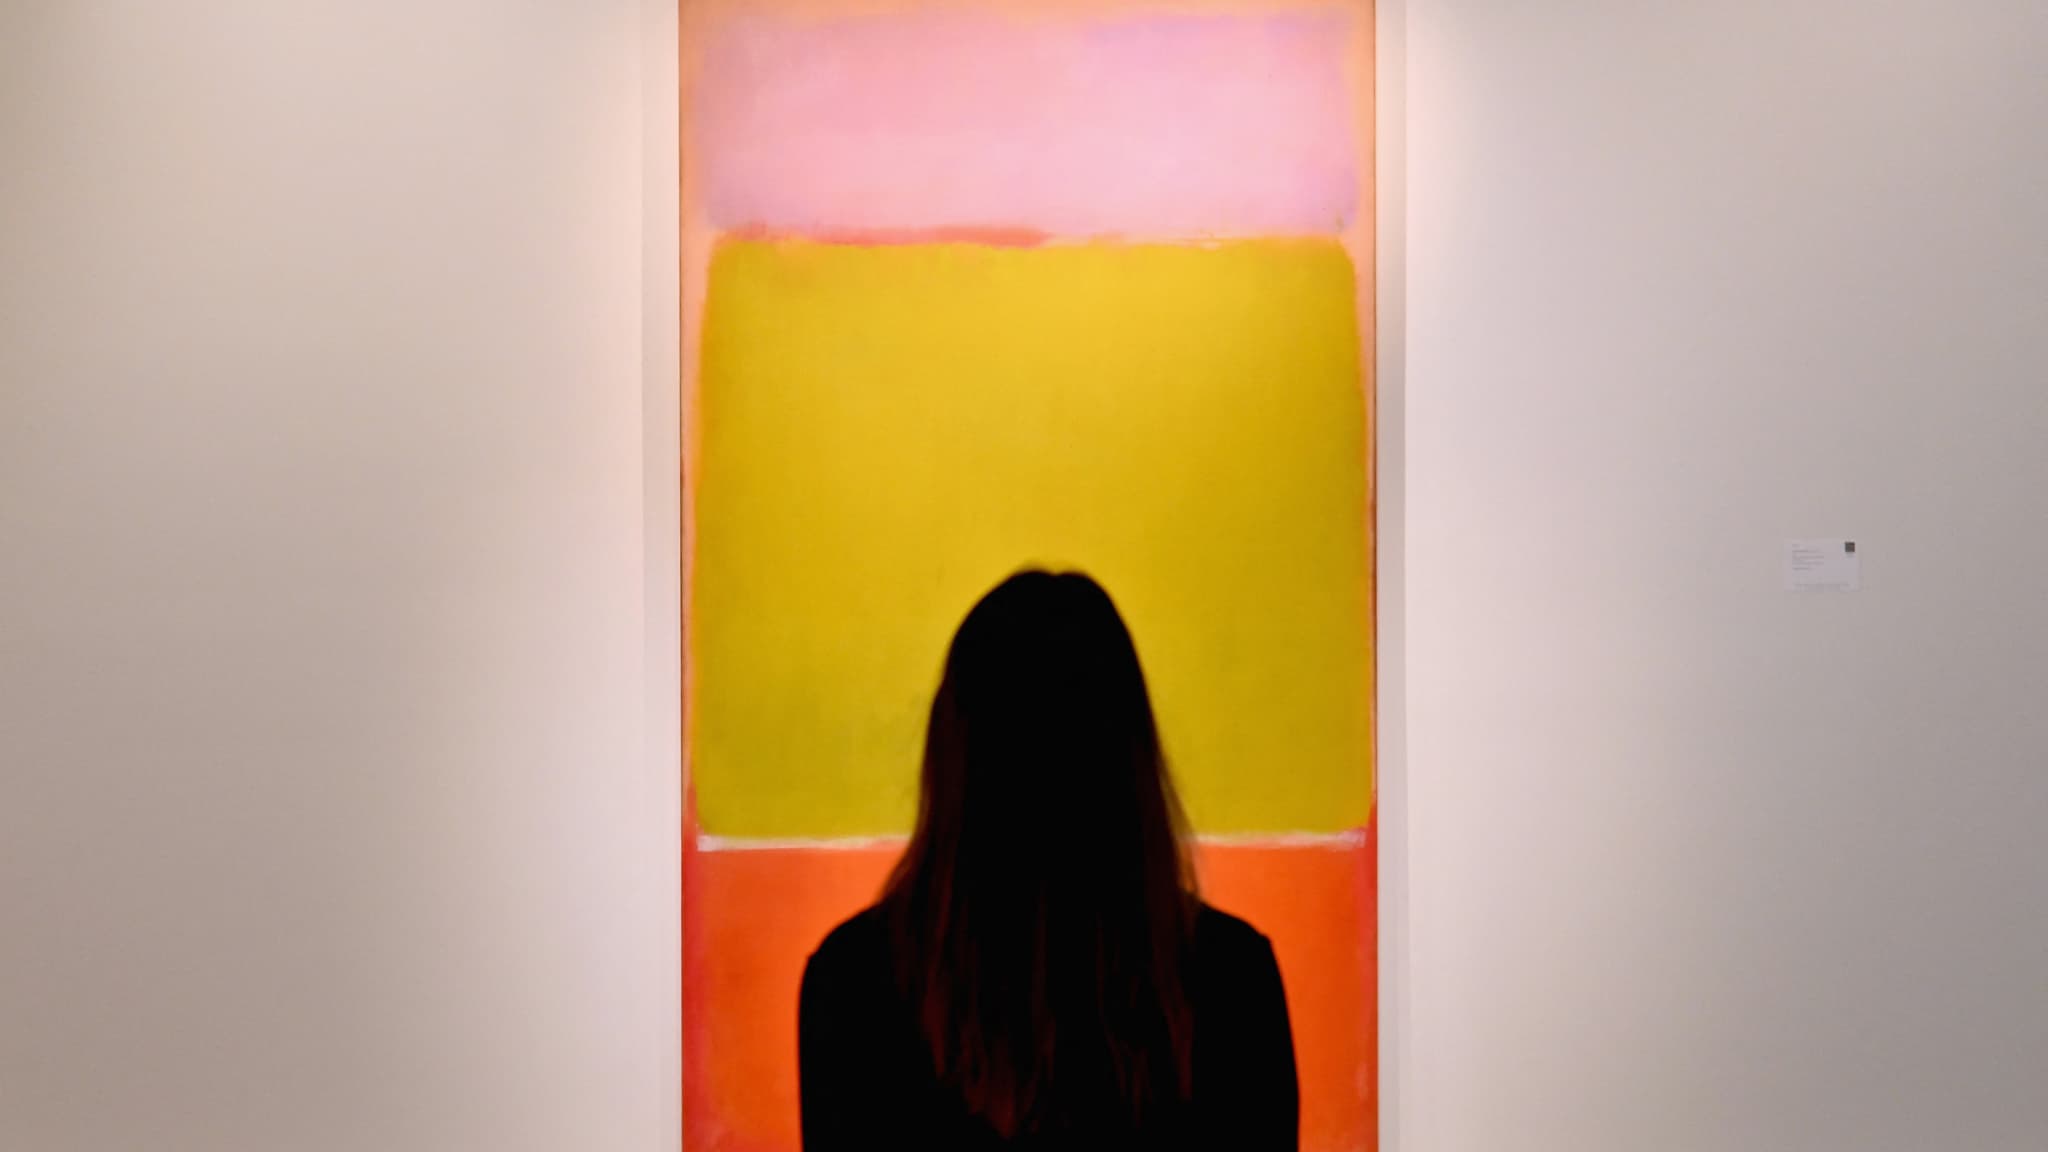 The Fondation Louis Vuitton invites you on a journey into the art of Mark  Rothko